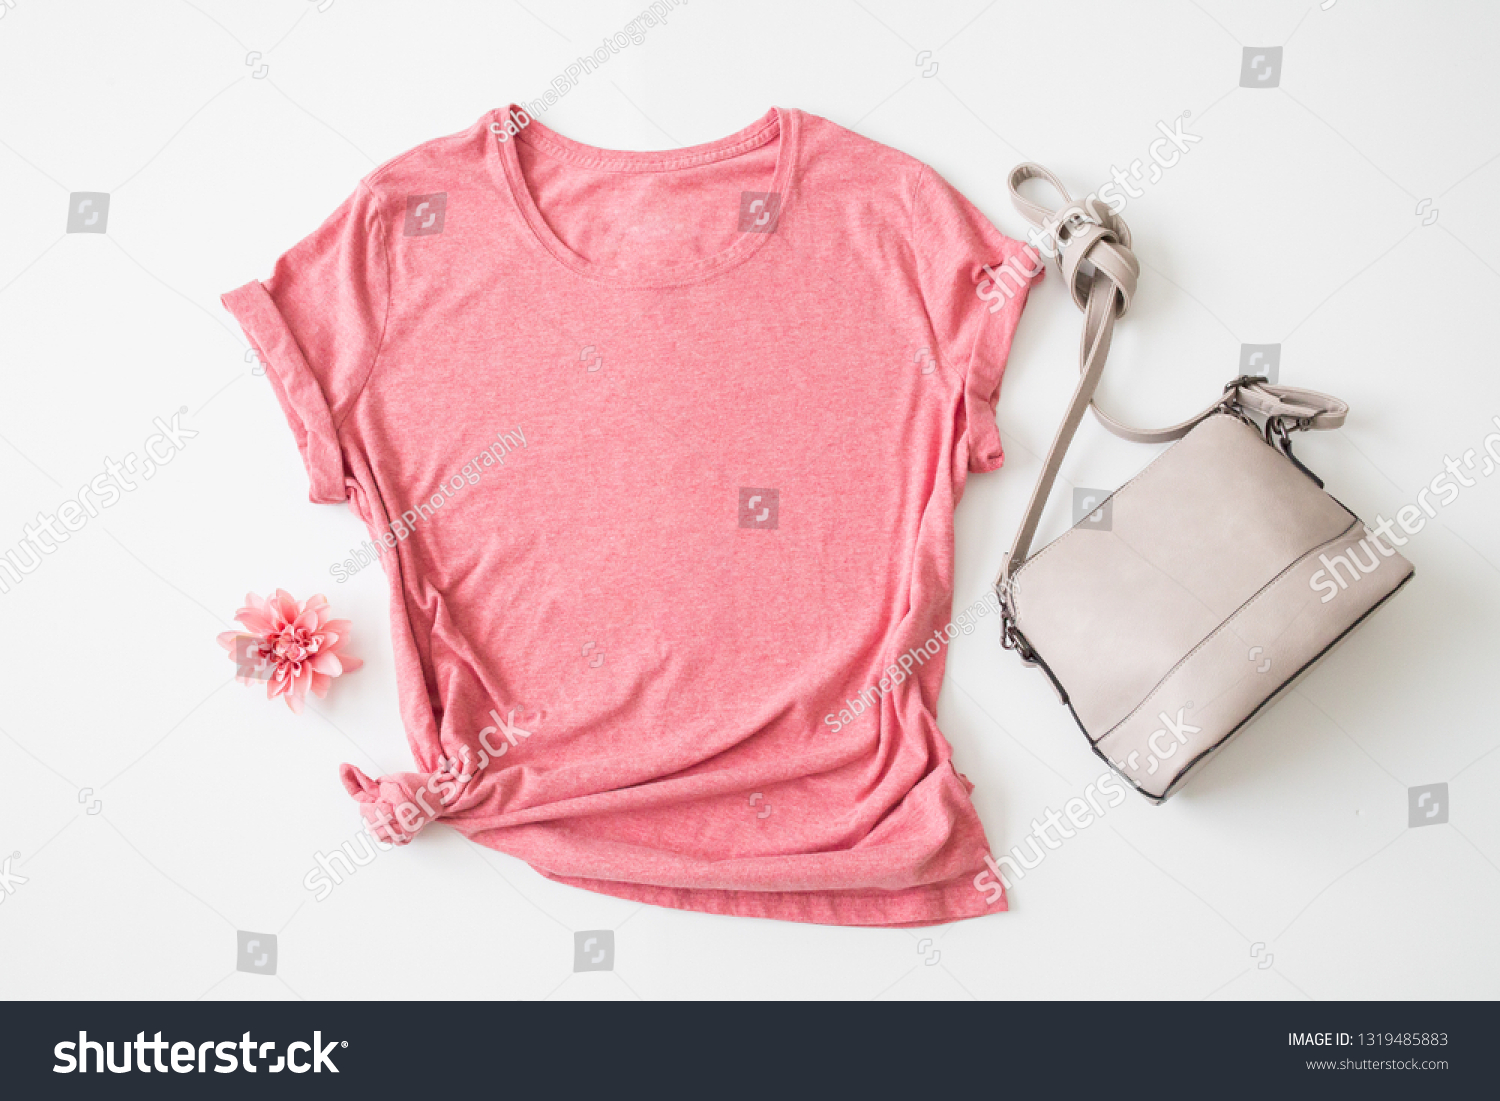 Styled Stock Photography "Heather", Mockup-Digital File, Pink Women's T-shirt with Purse and Flower Mock Up #1319485883